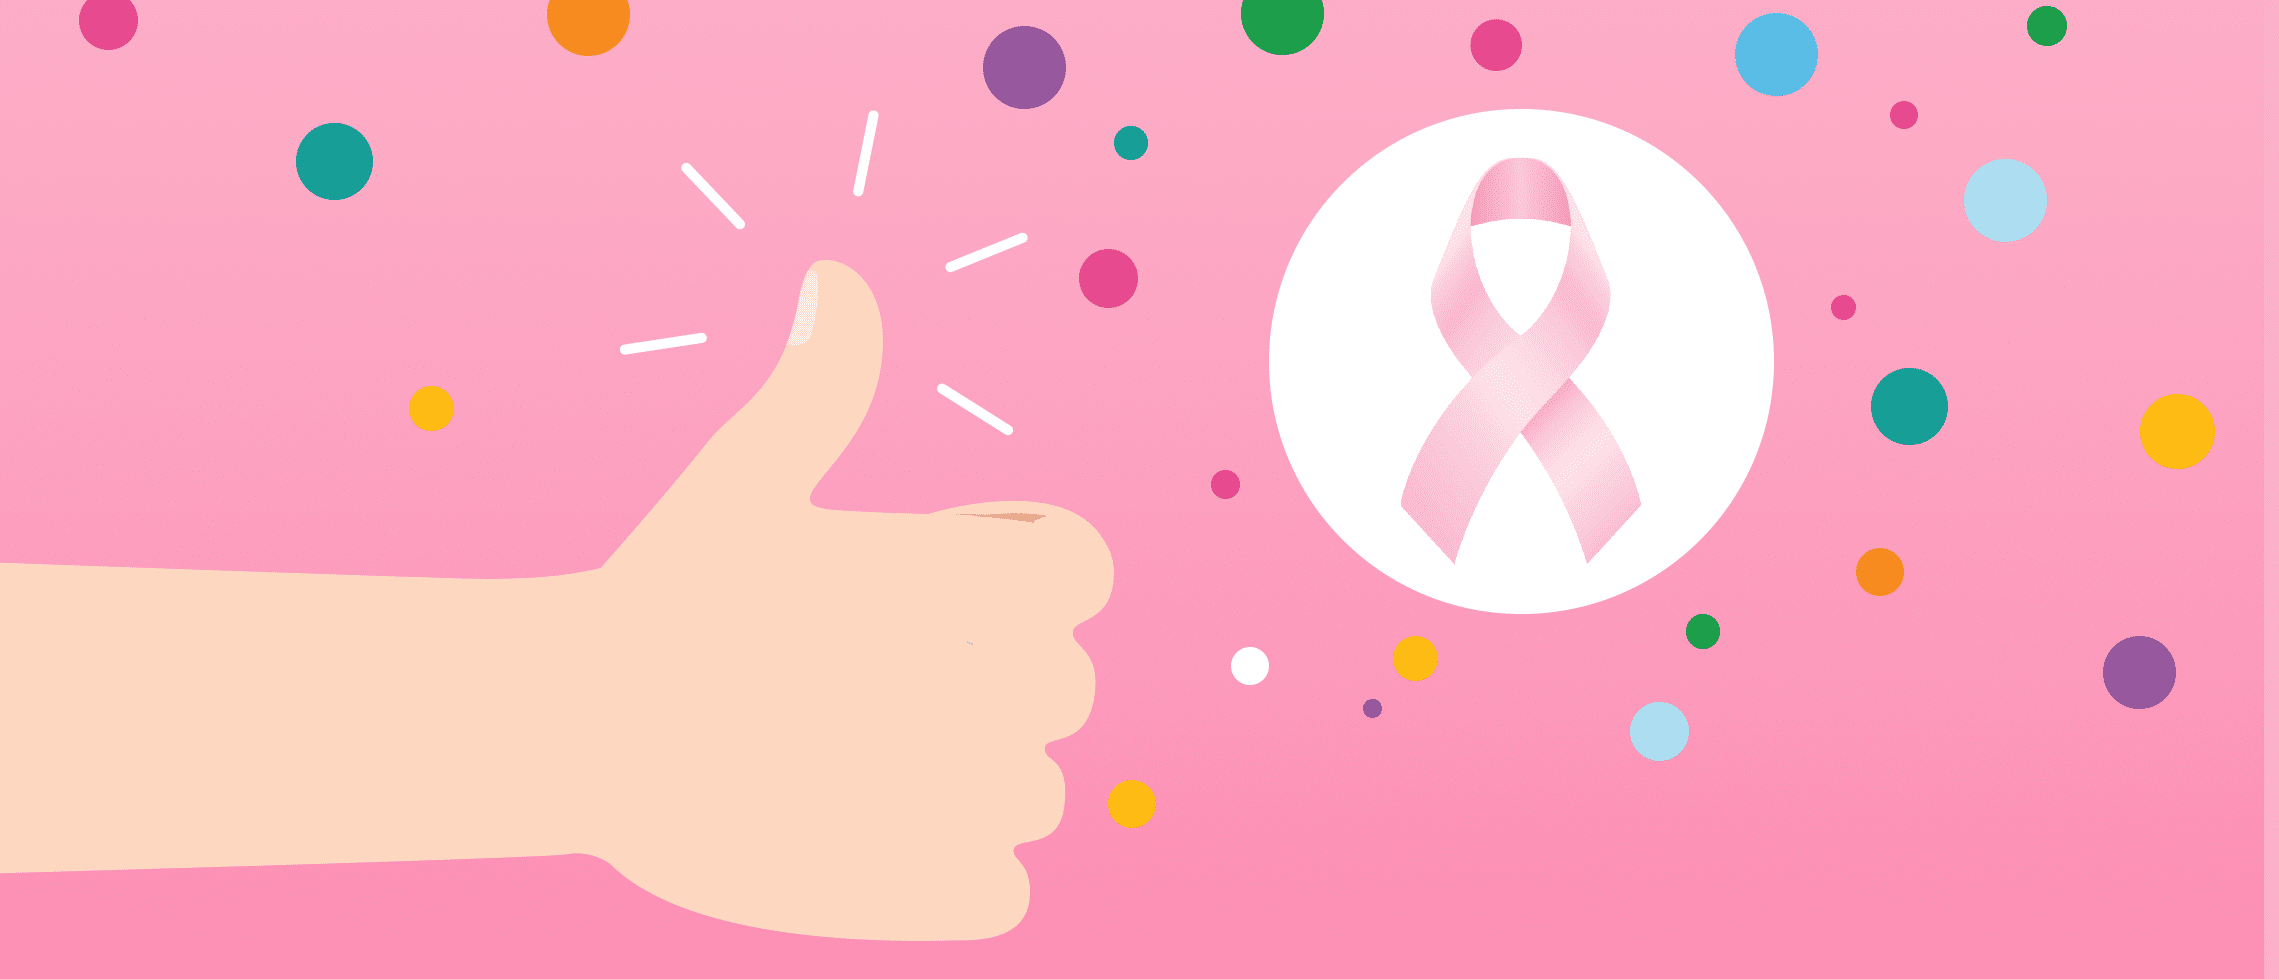 National Breast Cancer Foundation Wins $50,000 Donation from Shopkick!